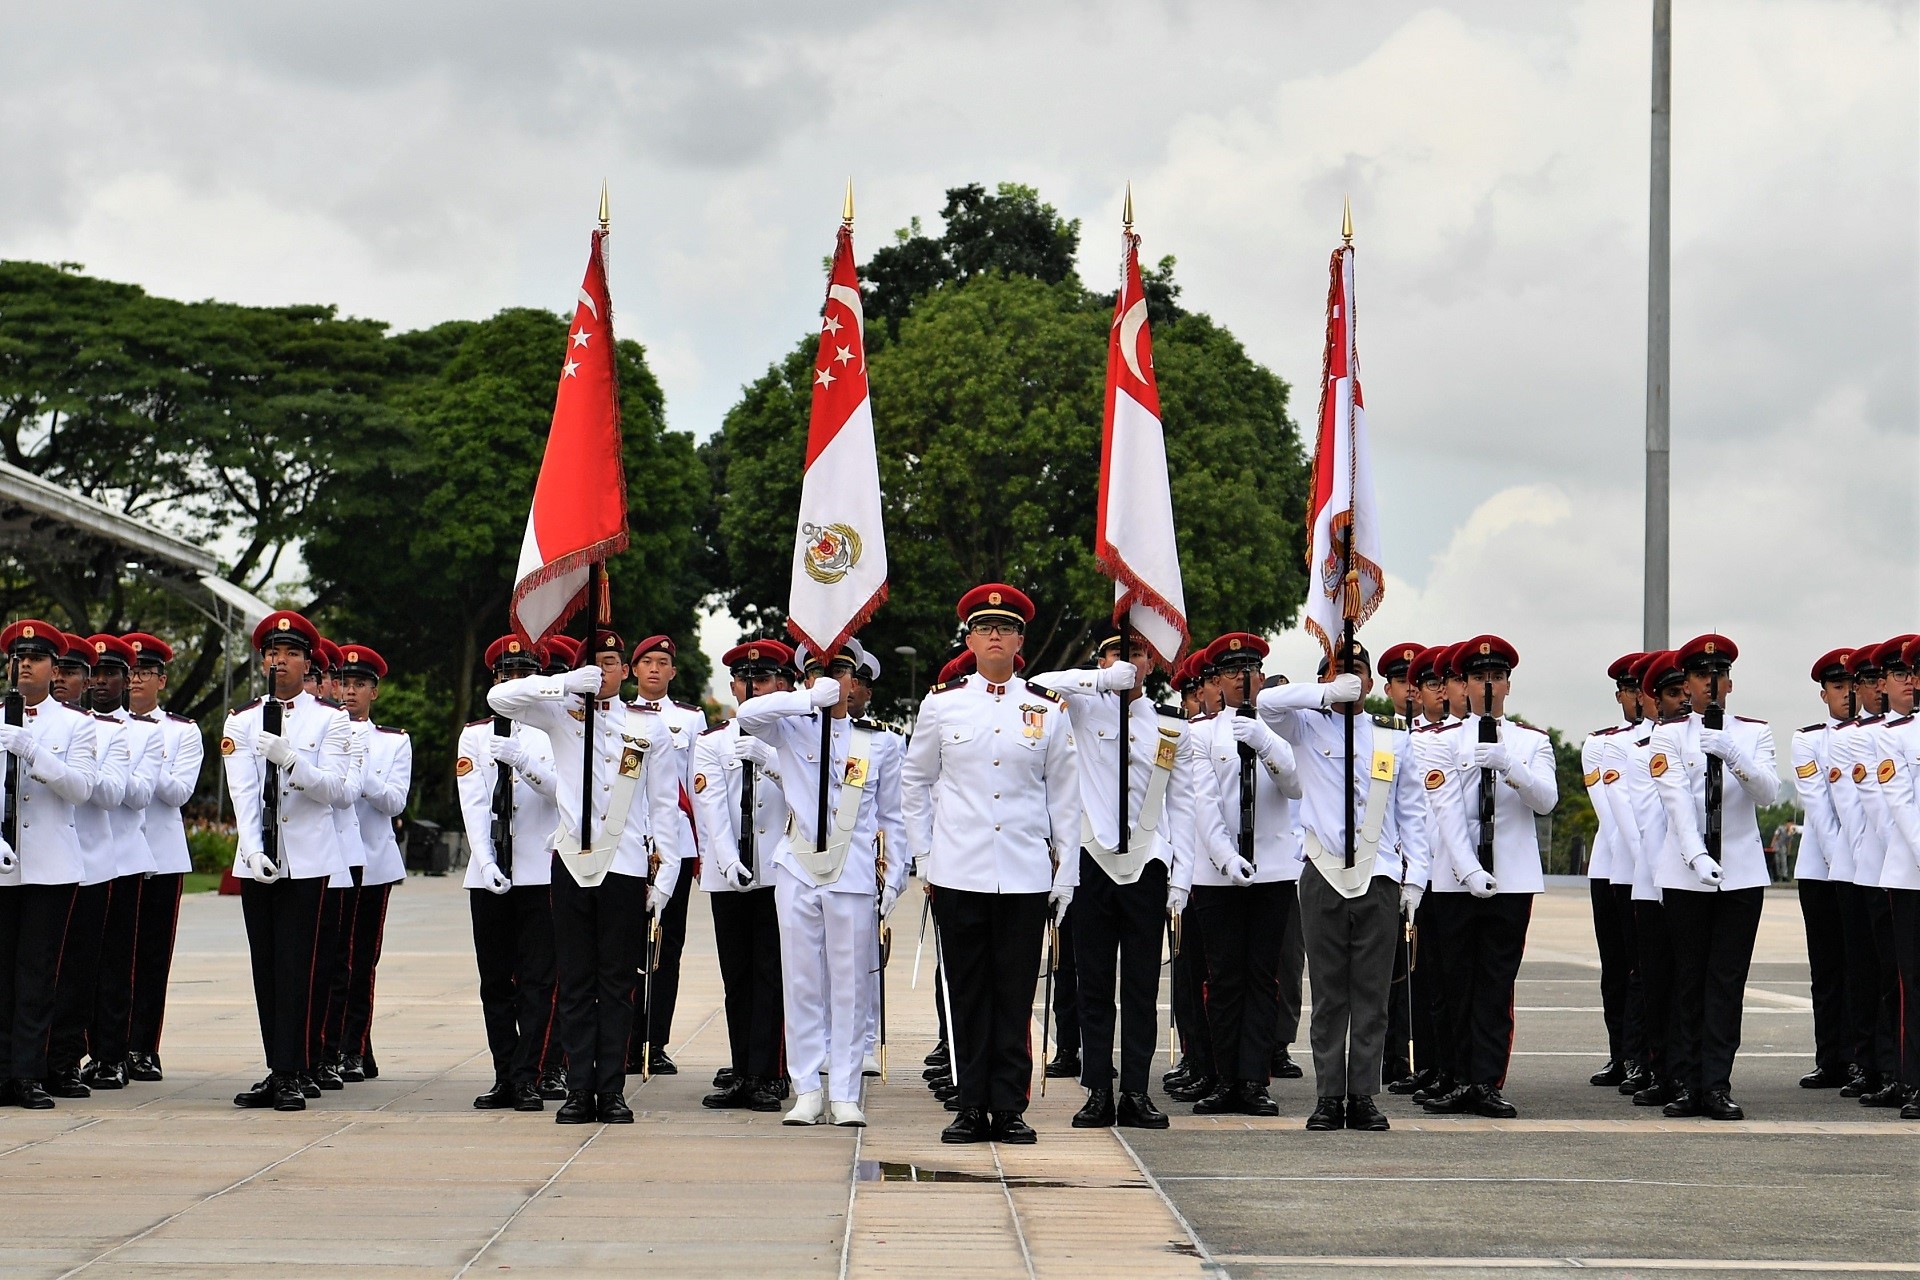 What is the Trooping of Colours?